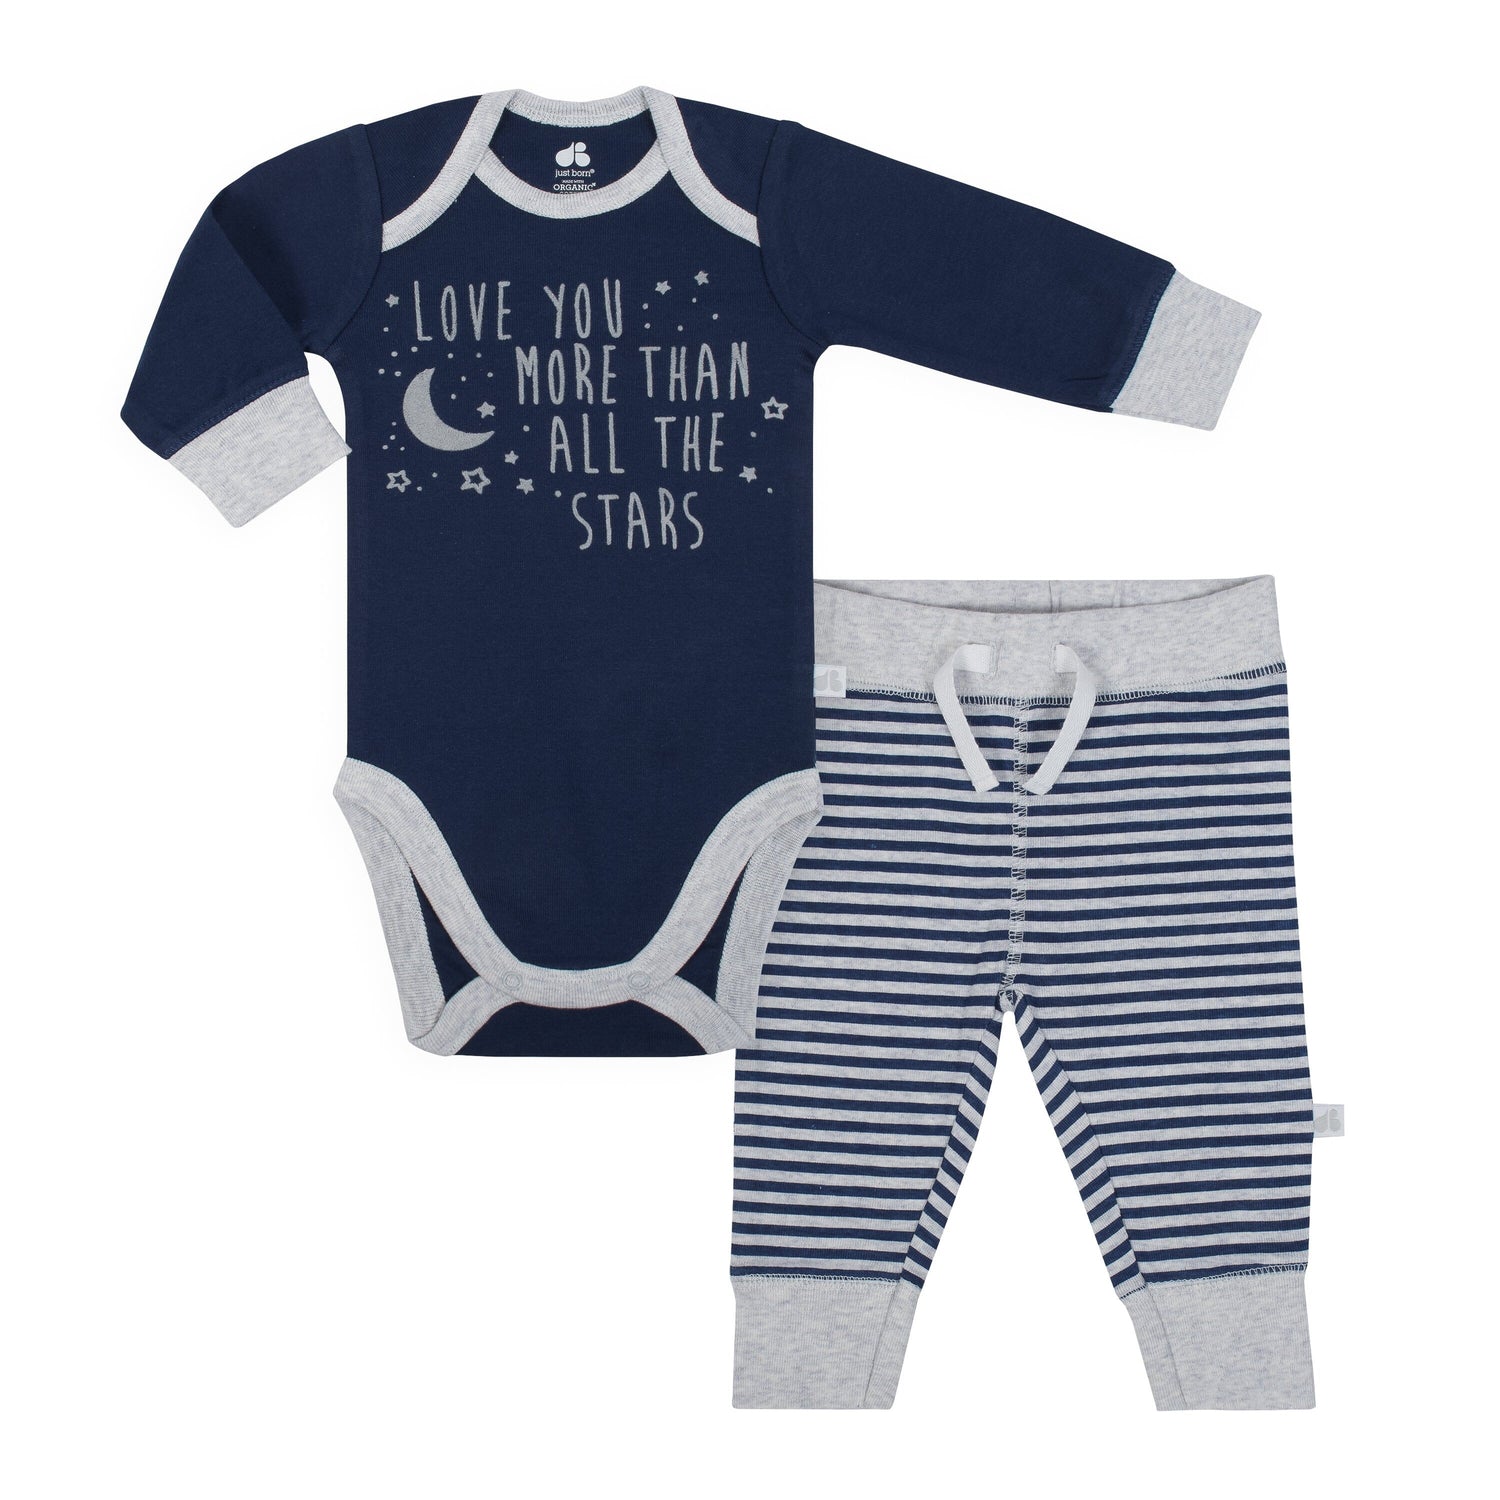 just born organic baby clothes